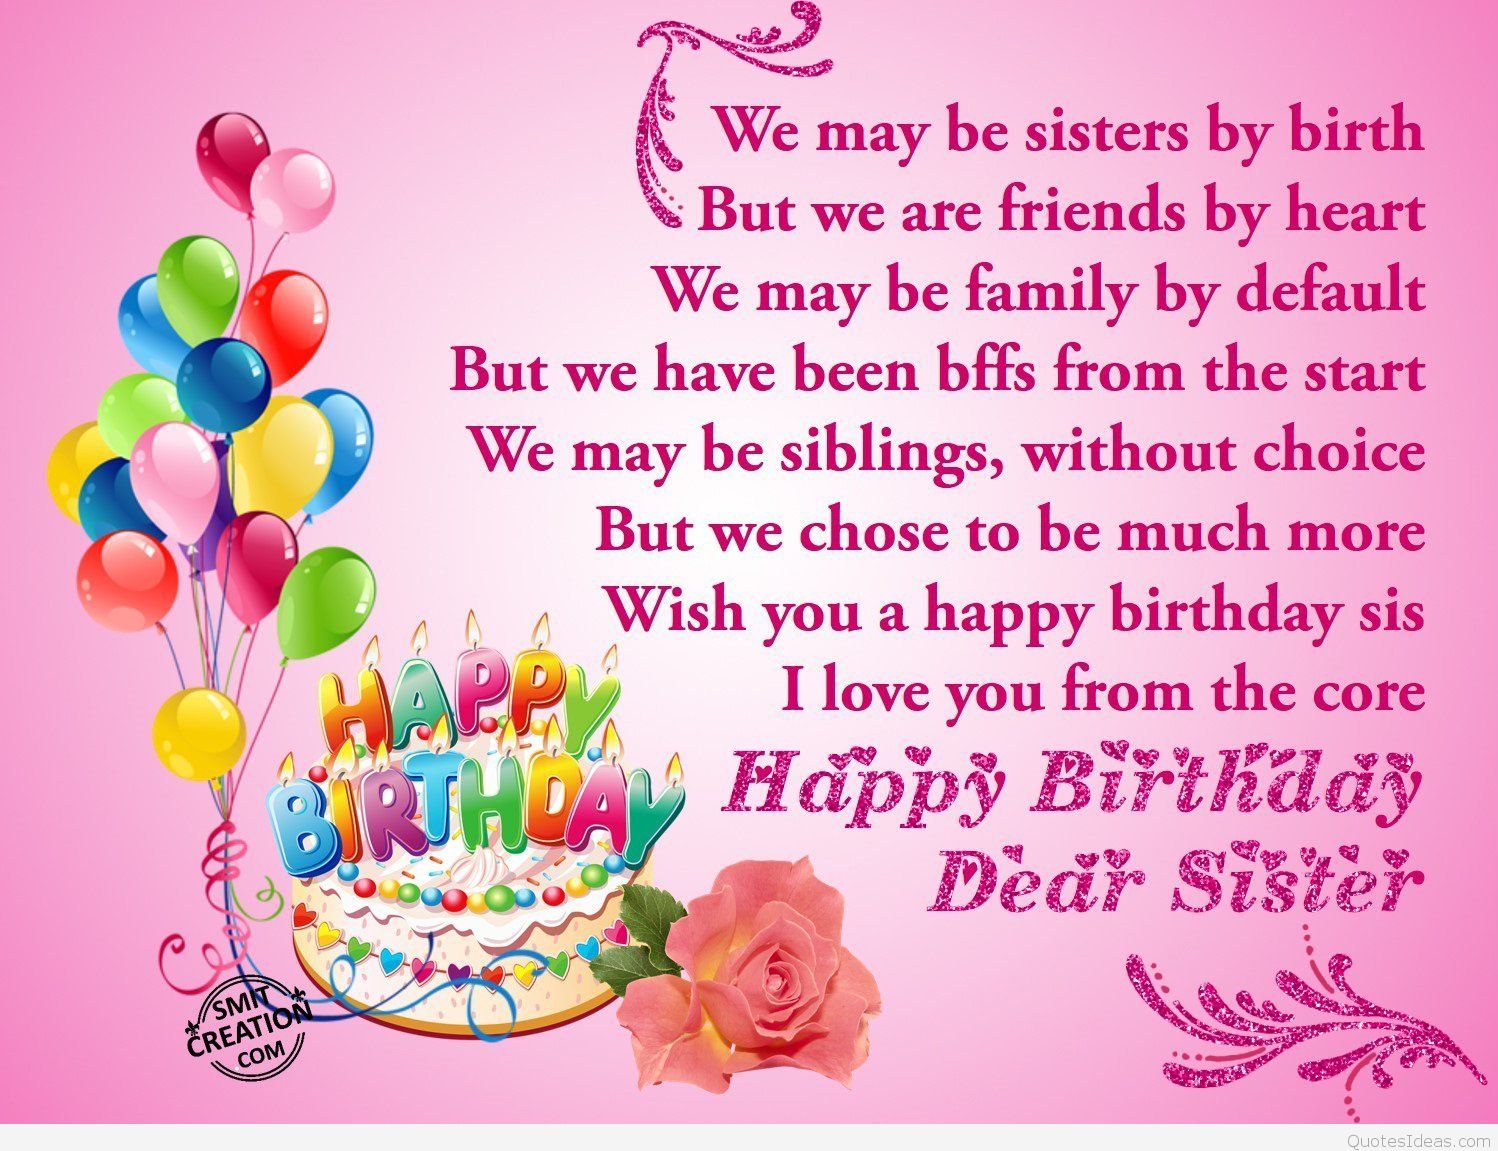 happy birthday sister wallpaper,birthday,text,sweetness,greeting card,party